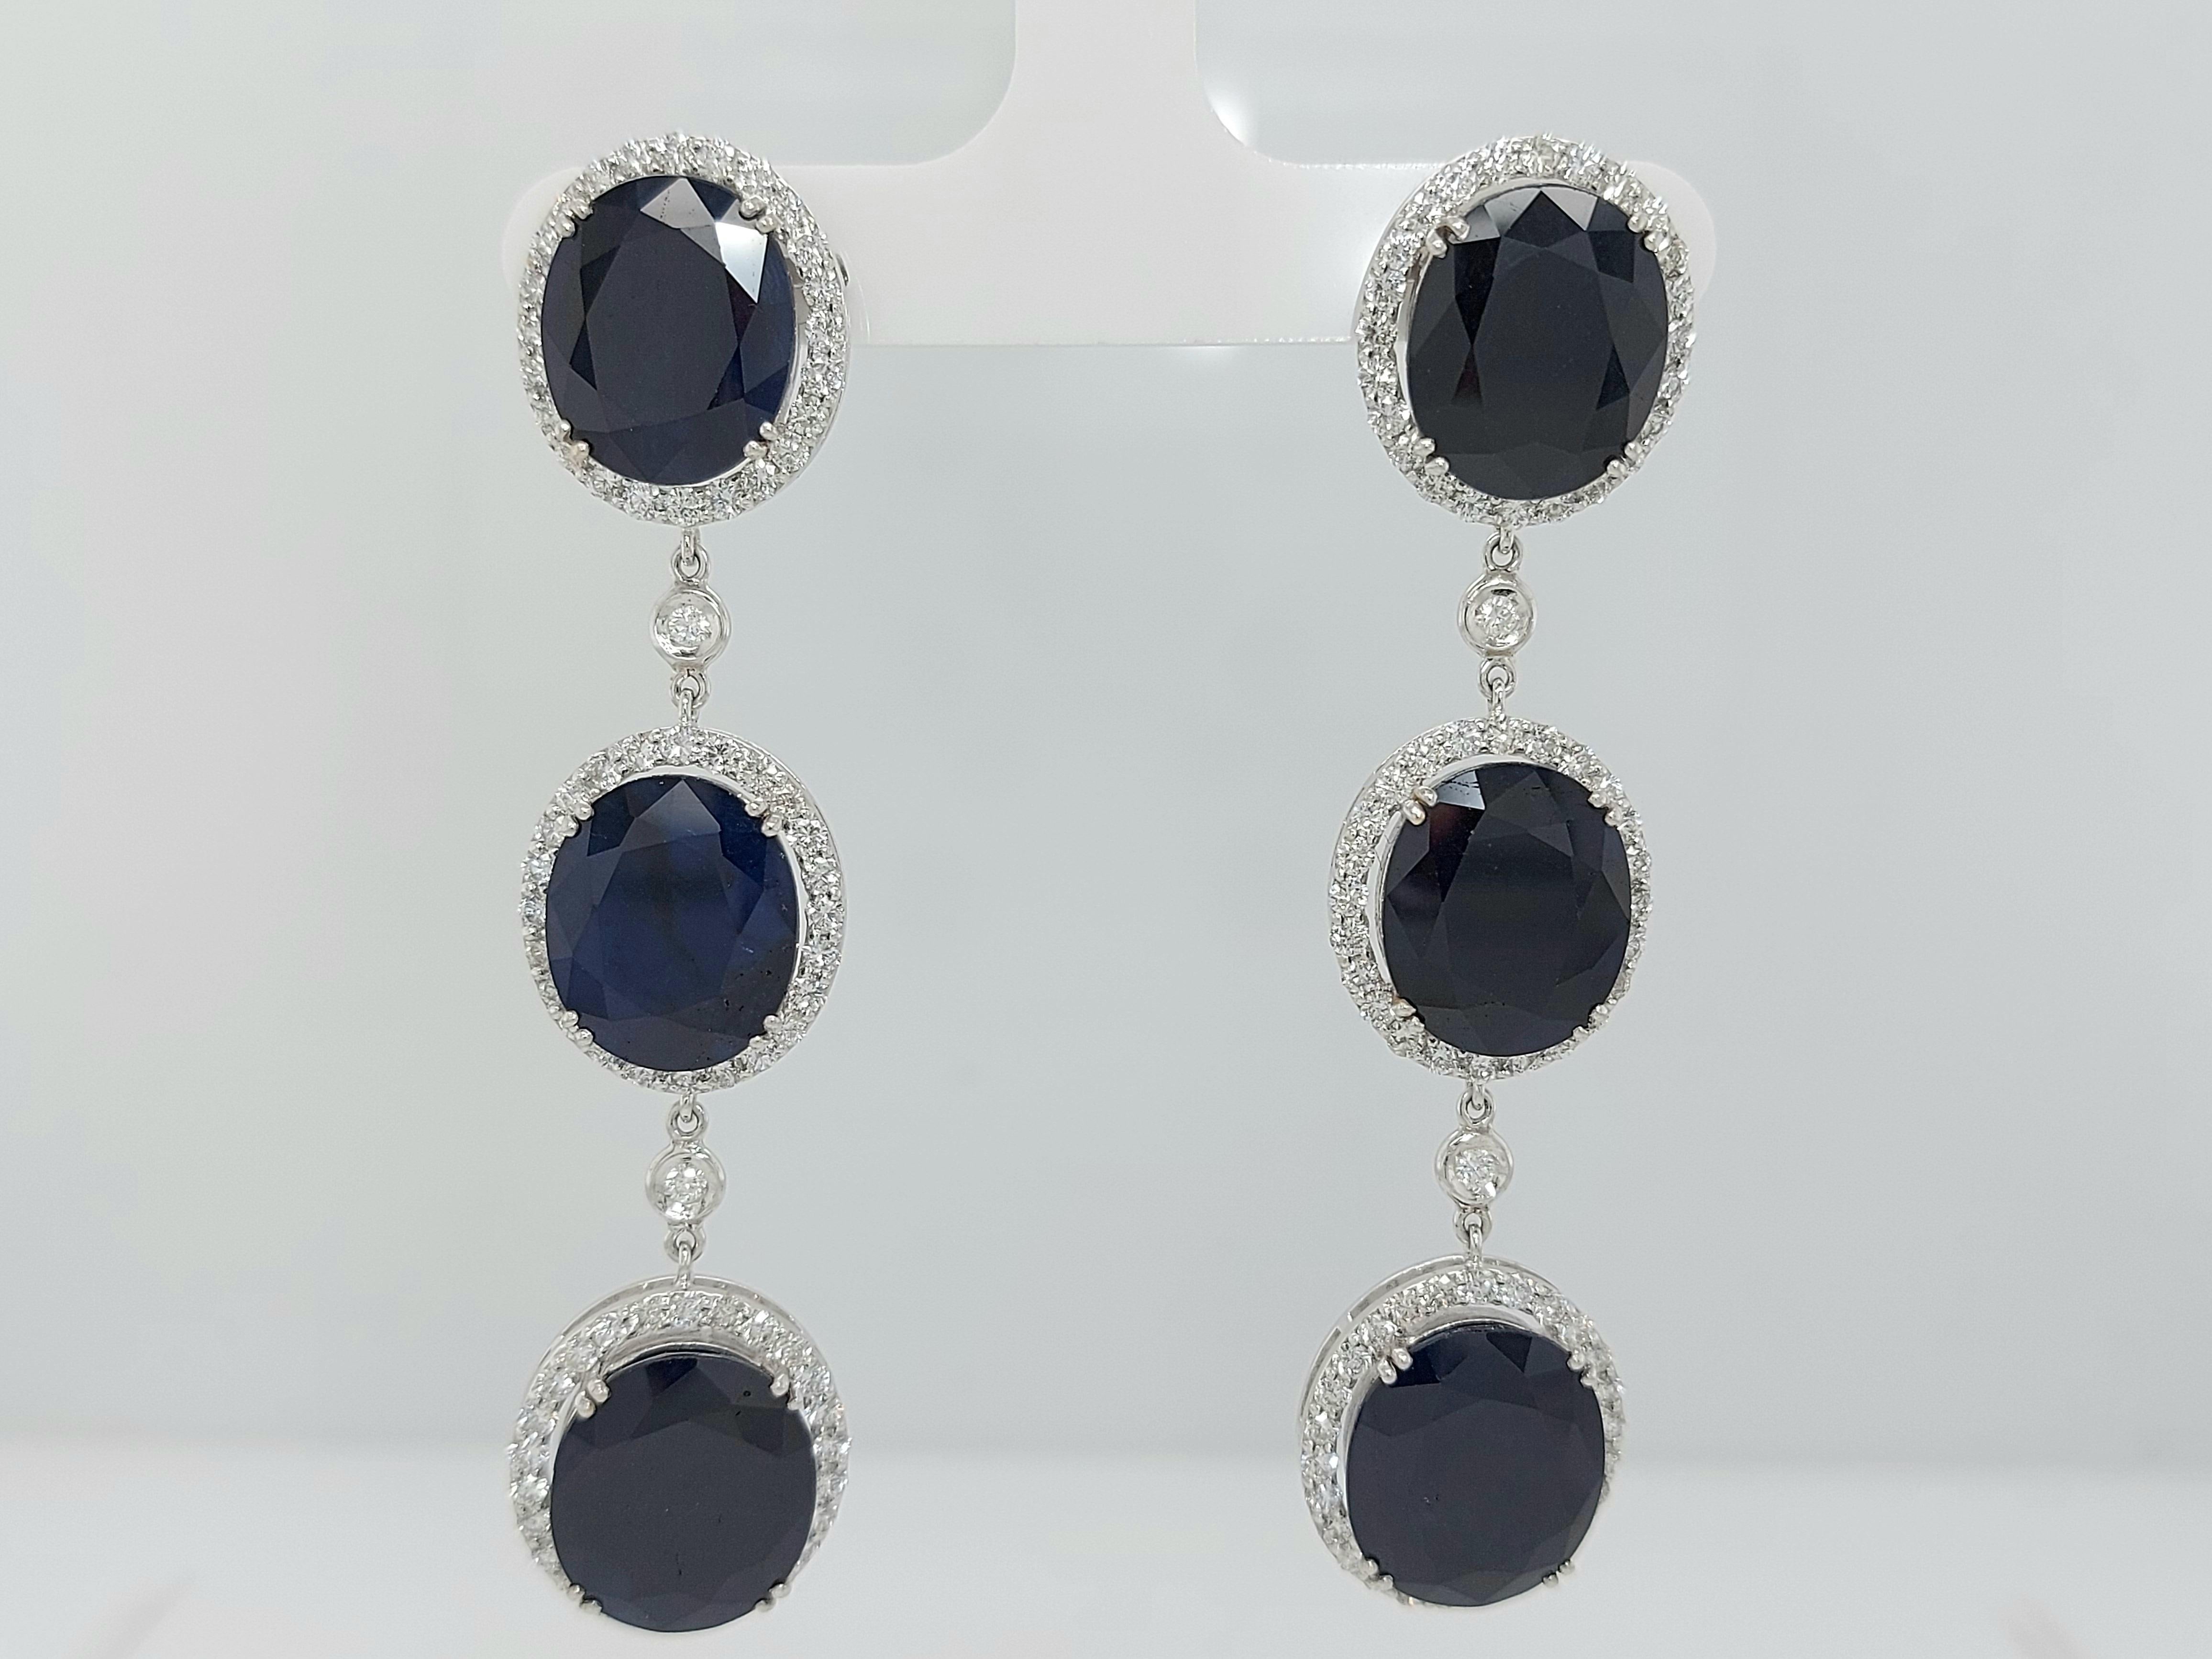 18kt White Gold Earrings 43.56ct Sapphire, 3.51ct Diamond For Sale 3